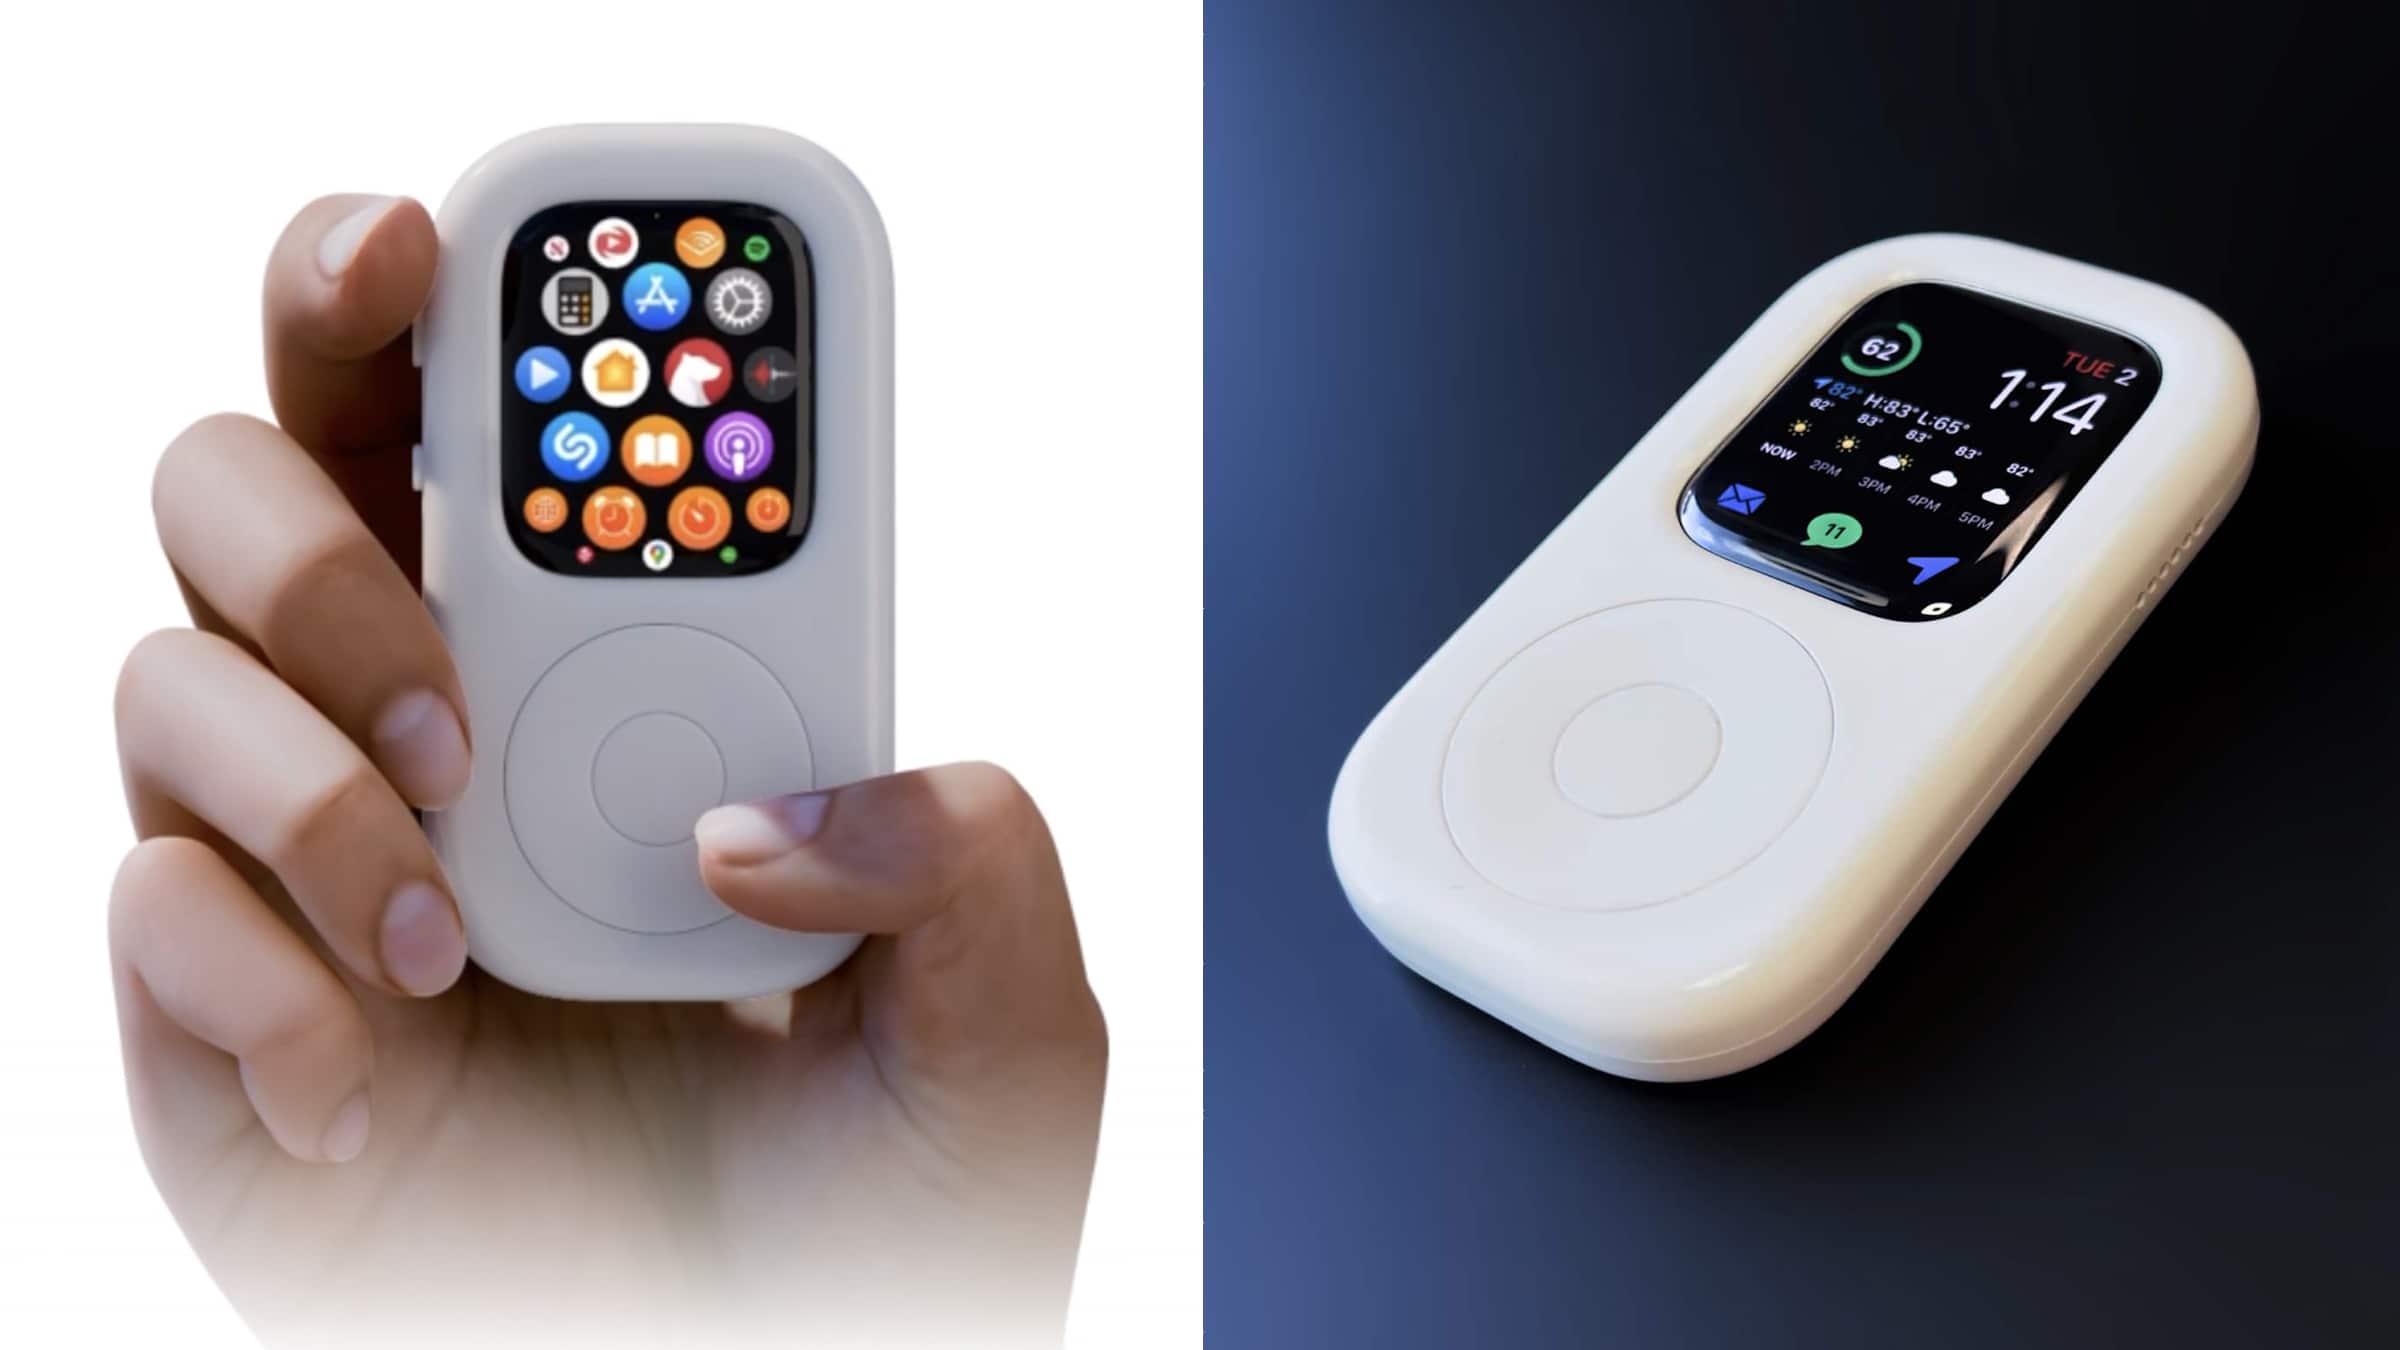 This tool turns your iWatch into a mini iPod.